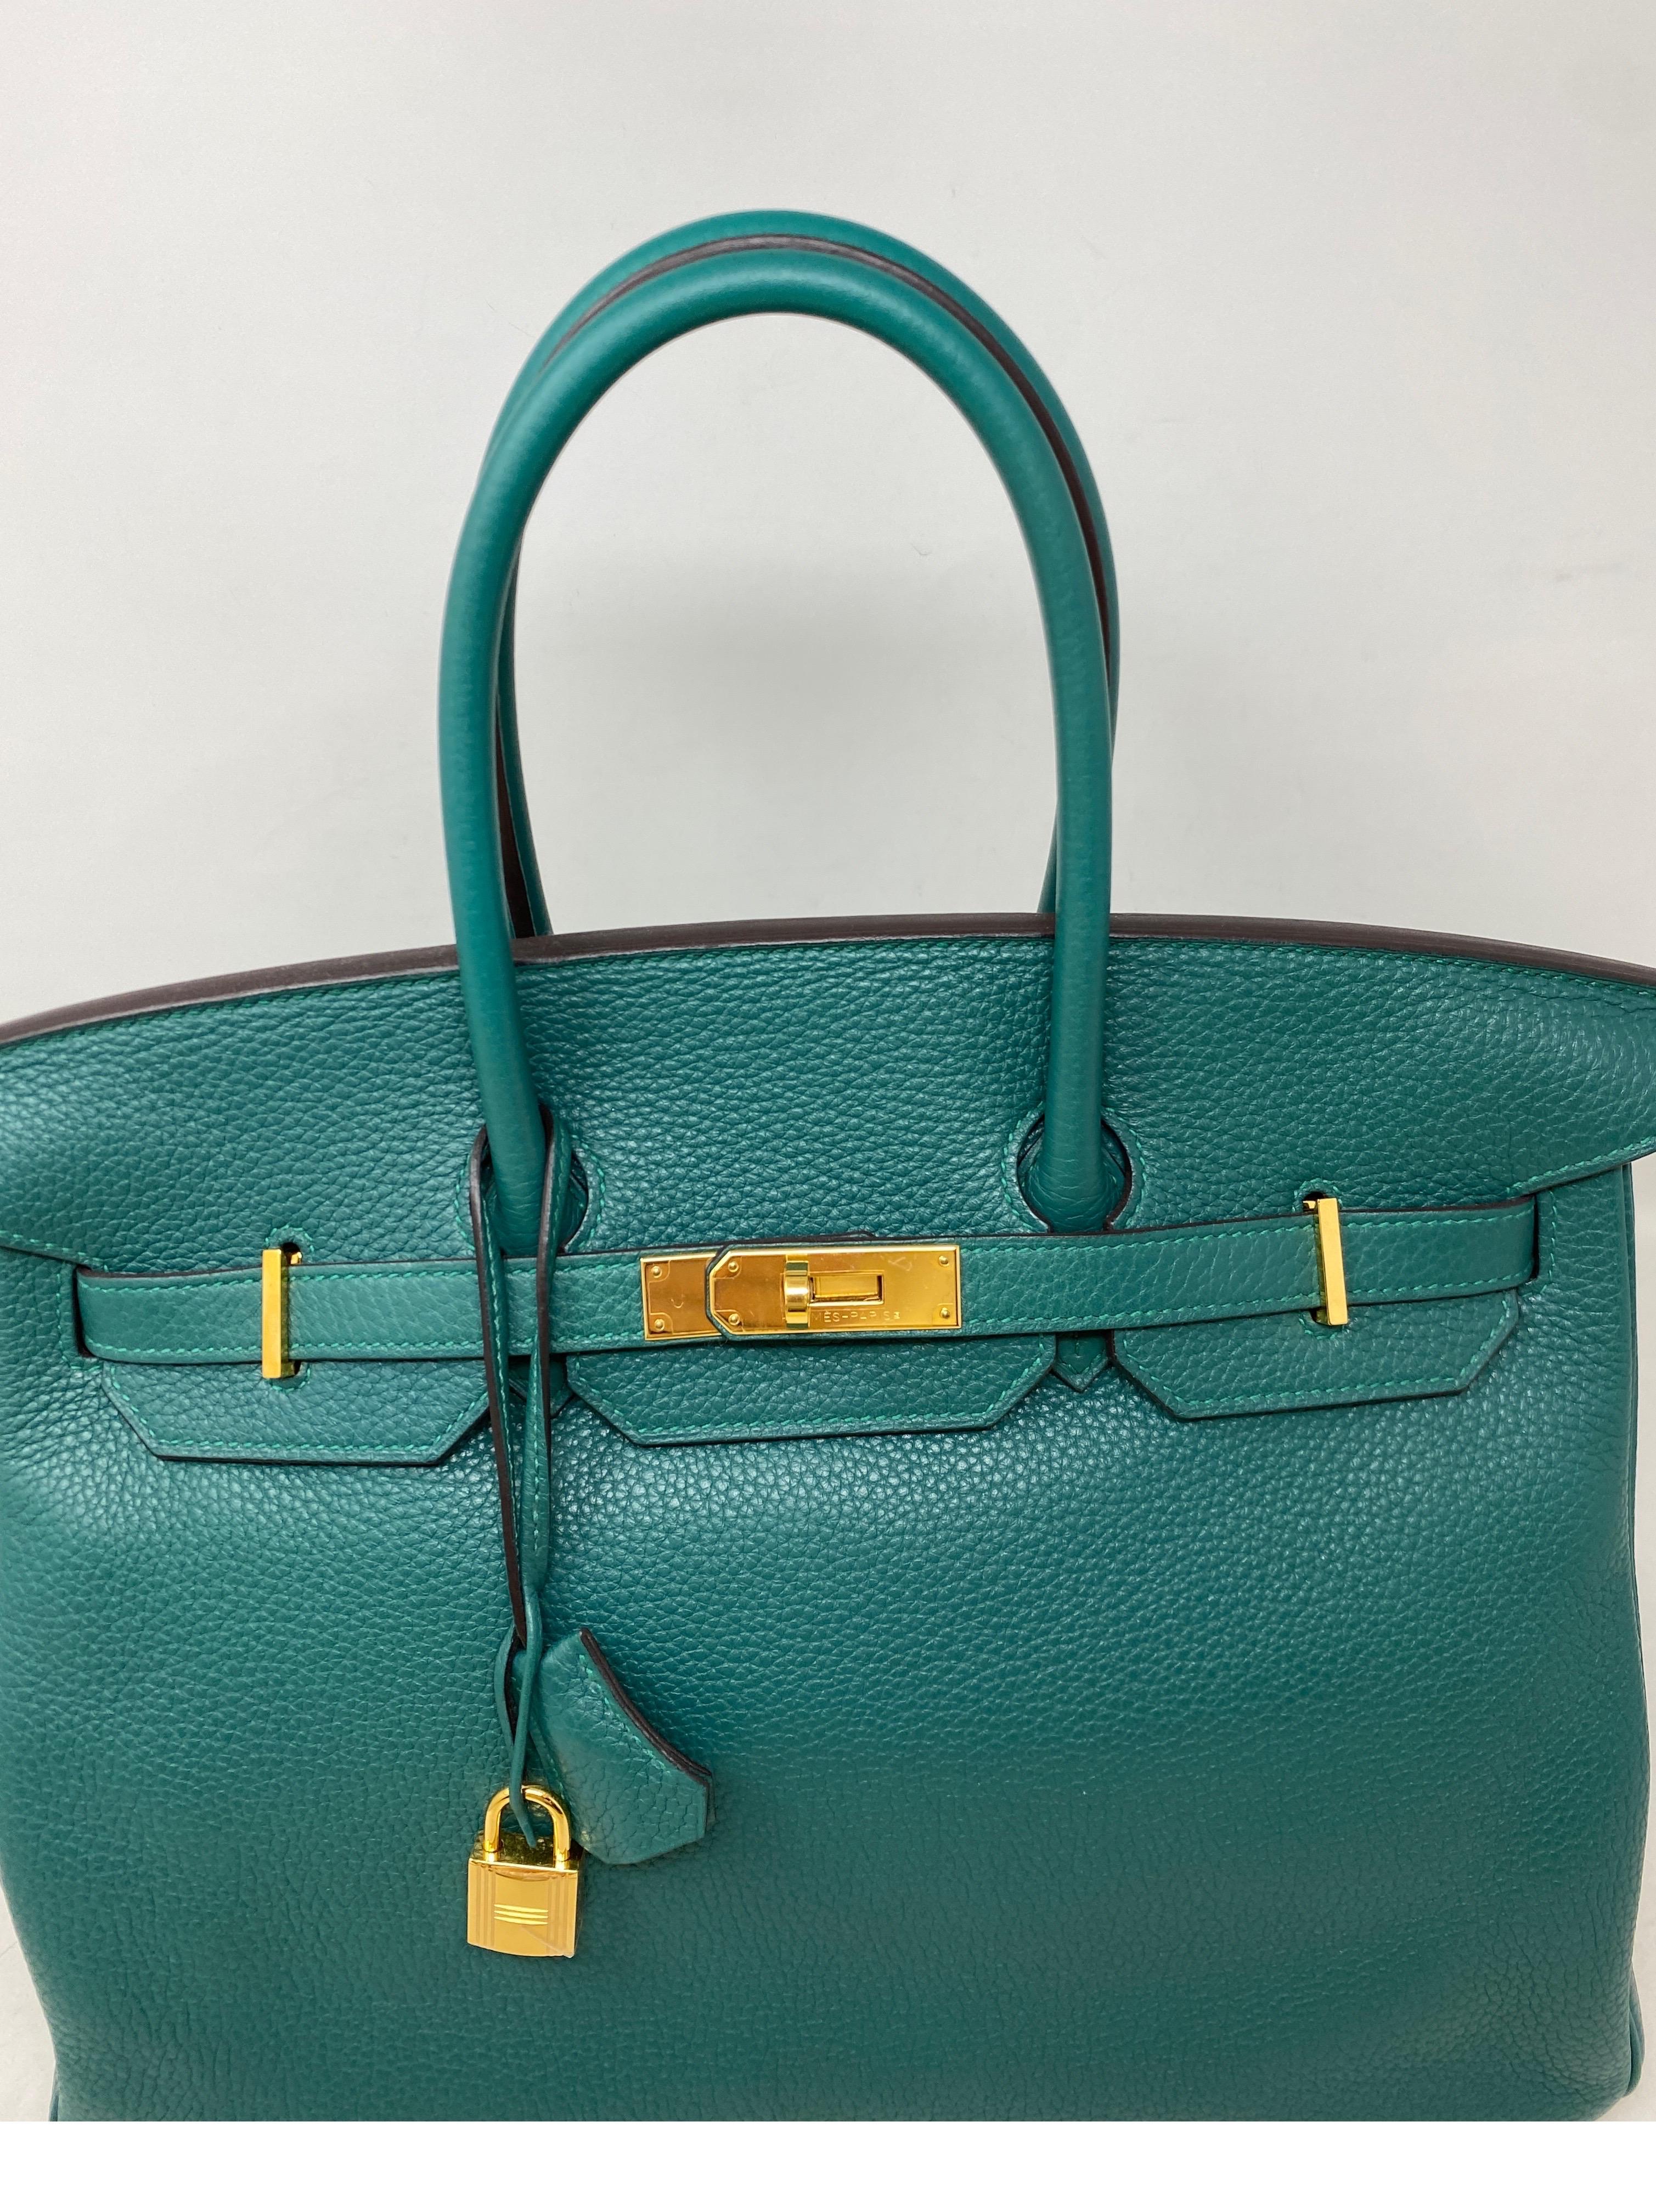 Hermes Malachite Birkin 35 Bag. Excellent condition. Gold hardware. Gorgeous neutral green color bag. Sought after color. Interior clean. Plastic still on hardware. Includes clochette, lock, keys, and dust bag. Guaranteed authentic. 